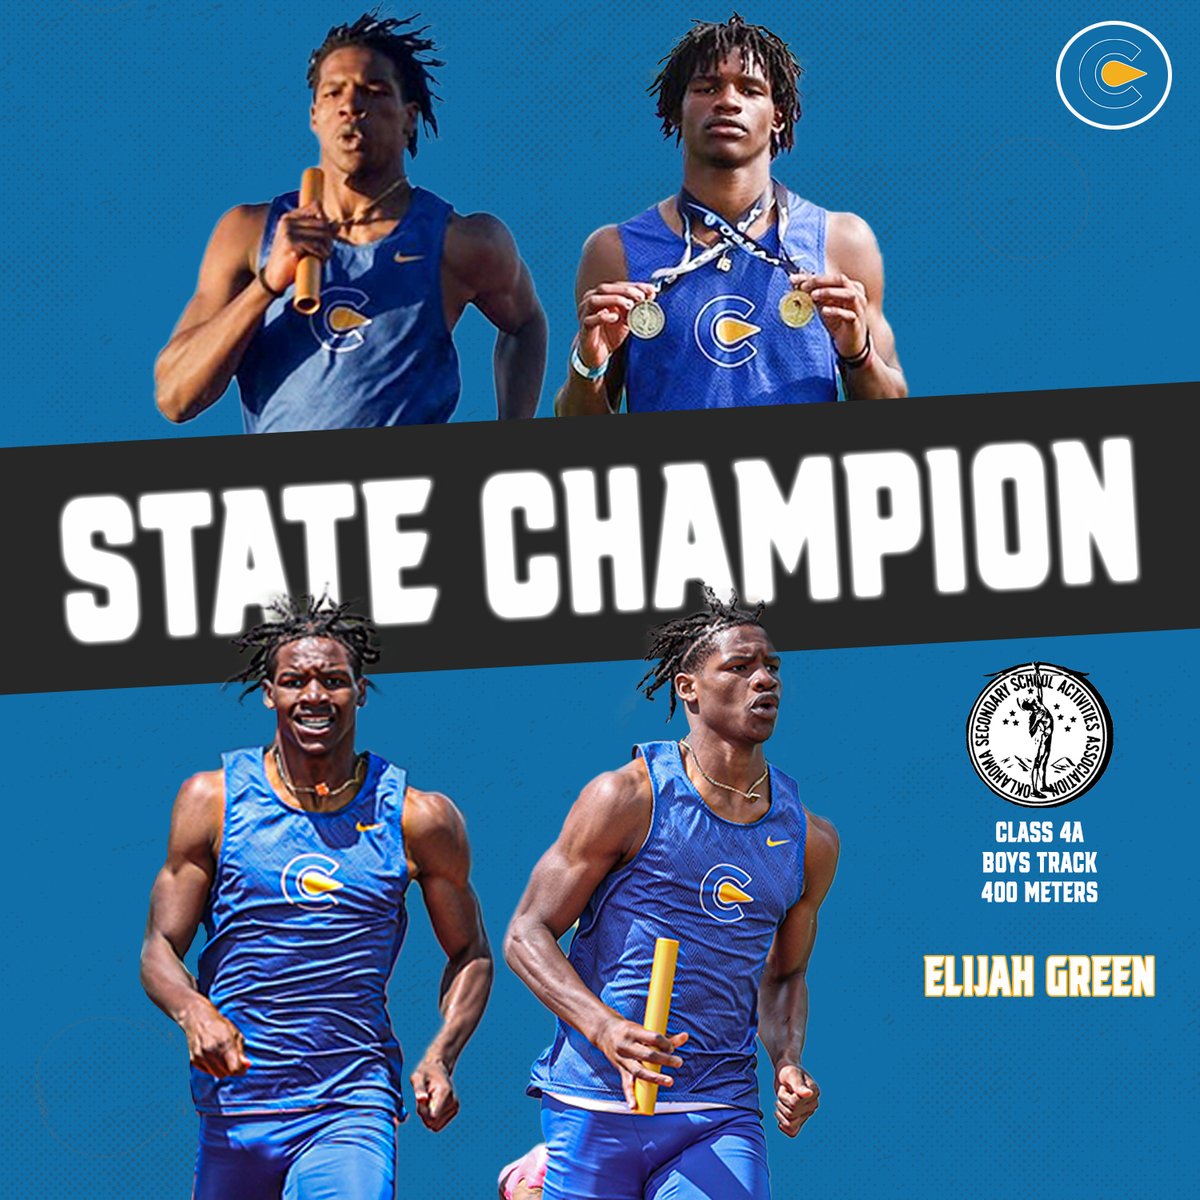 𝙎𝙏𝘼𝙏𝙀 𝘾𝙃𝘼𝙈𝙋 🏆👟 Congratulations to the electric @Elijah_green1 from @ClassenSASOKC for bringing home the gold medal in the 400-meters in last weekend's Class 4A State Track Meet in Ardmore! Elijah posted a time of 48.7 in the event 🔥 @OKCPS